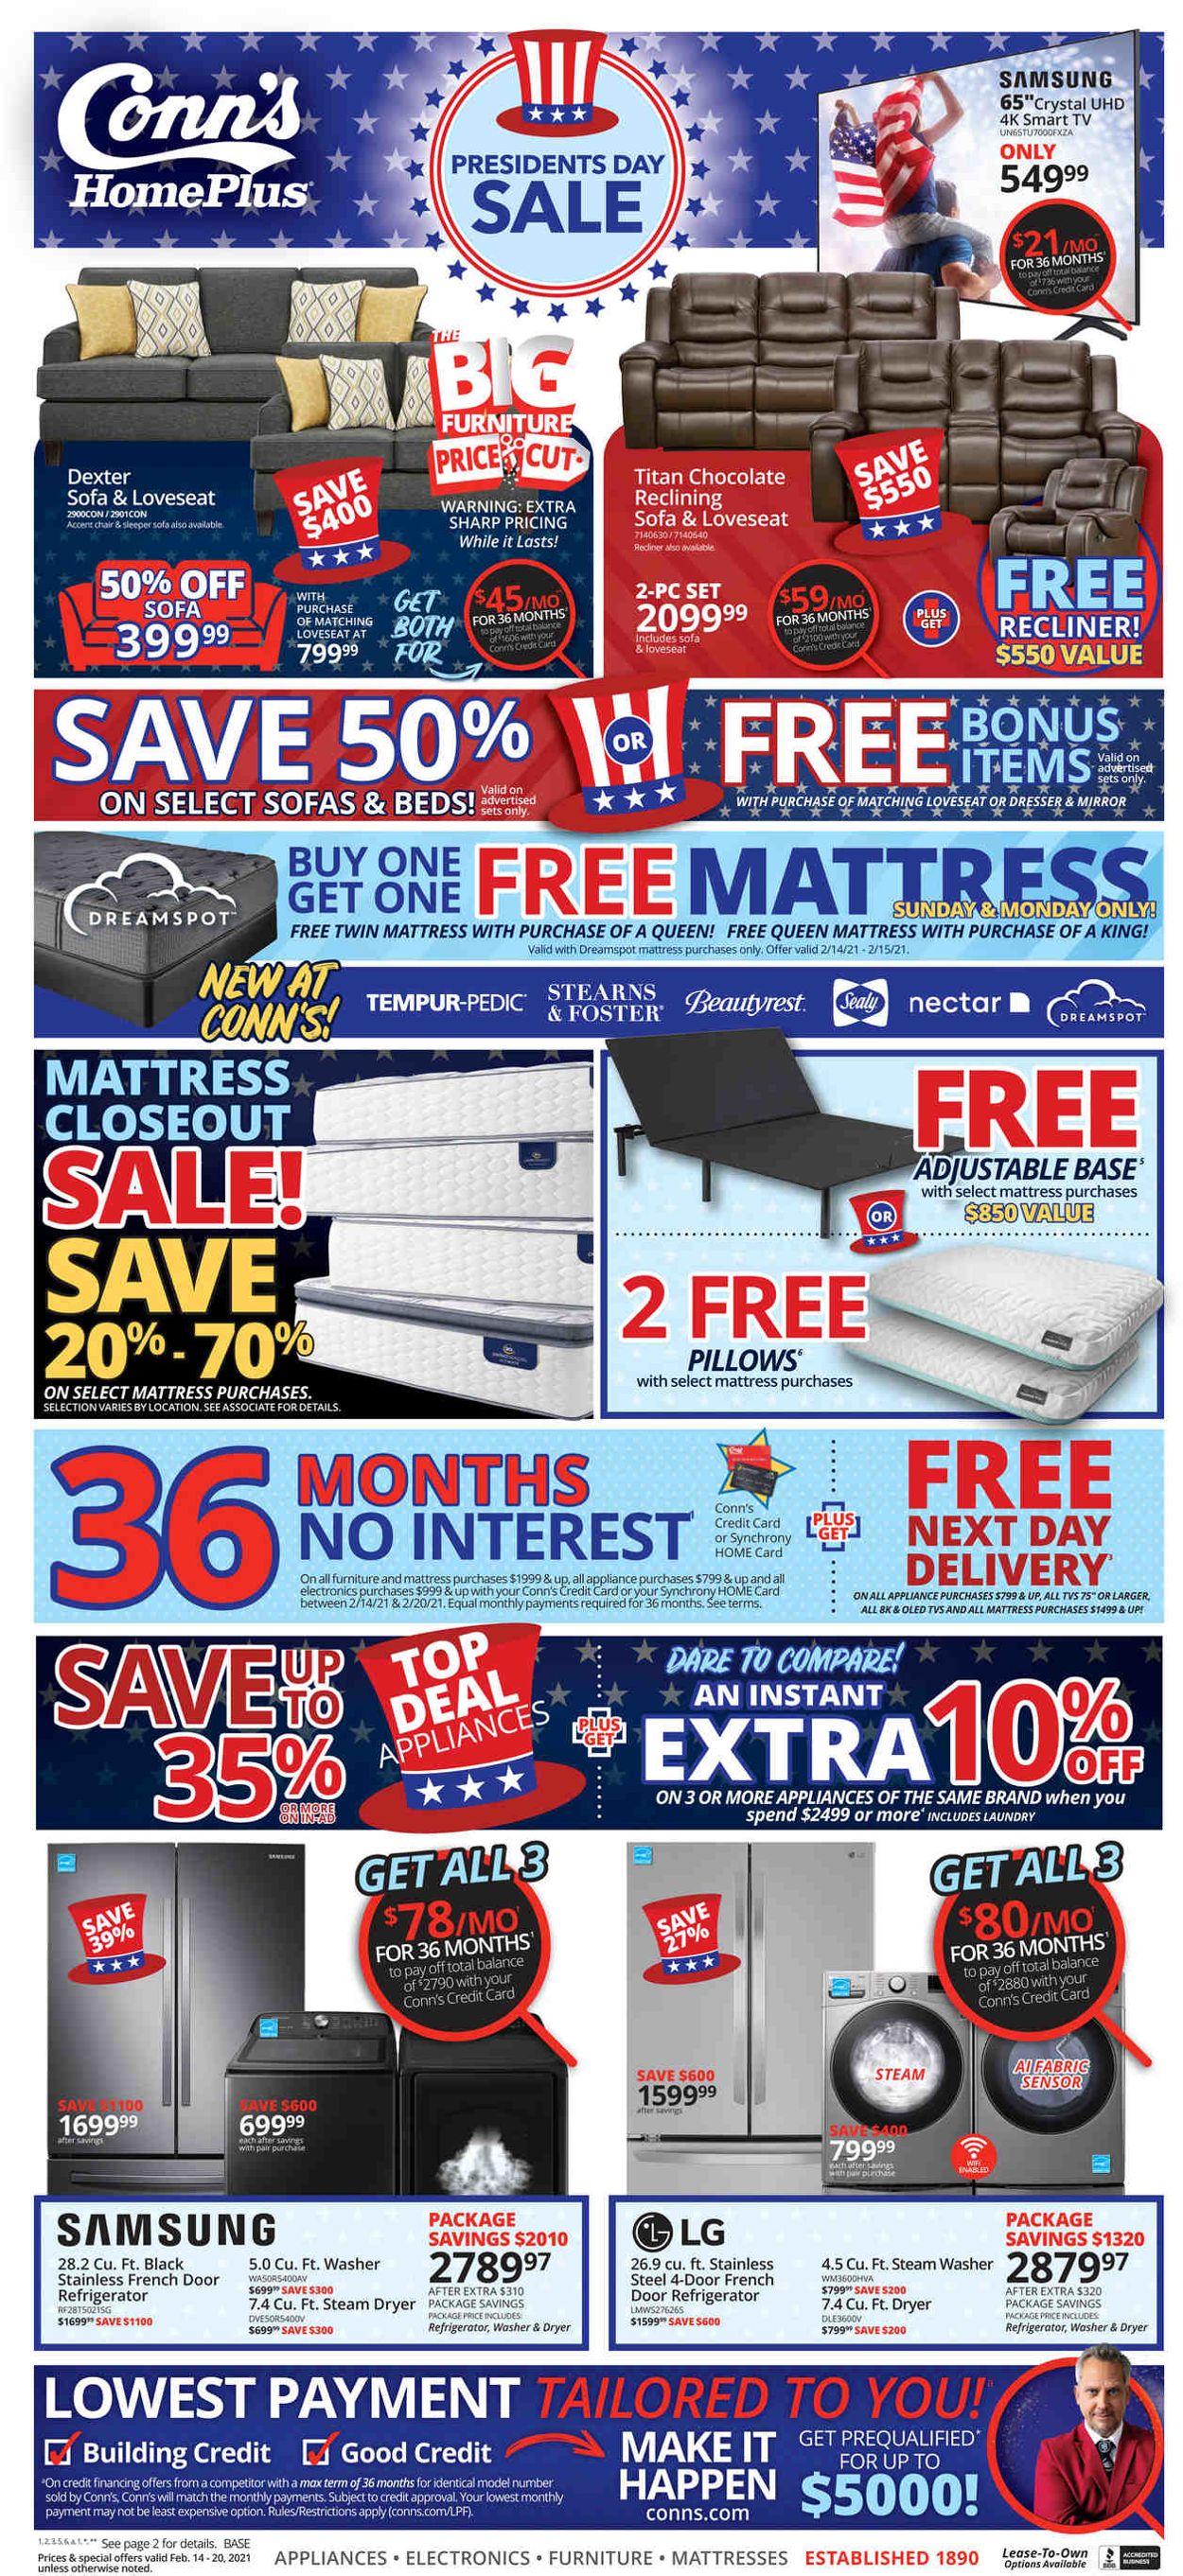 Conn's Home Plus Weekly Ad Circular - valid 02/14-02/20/2021